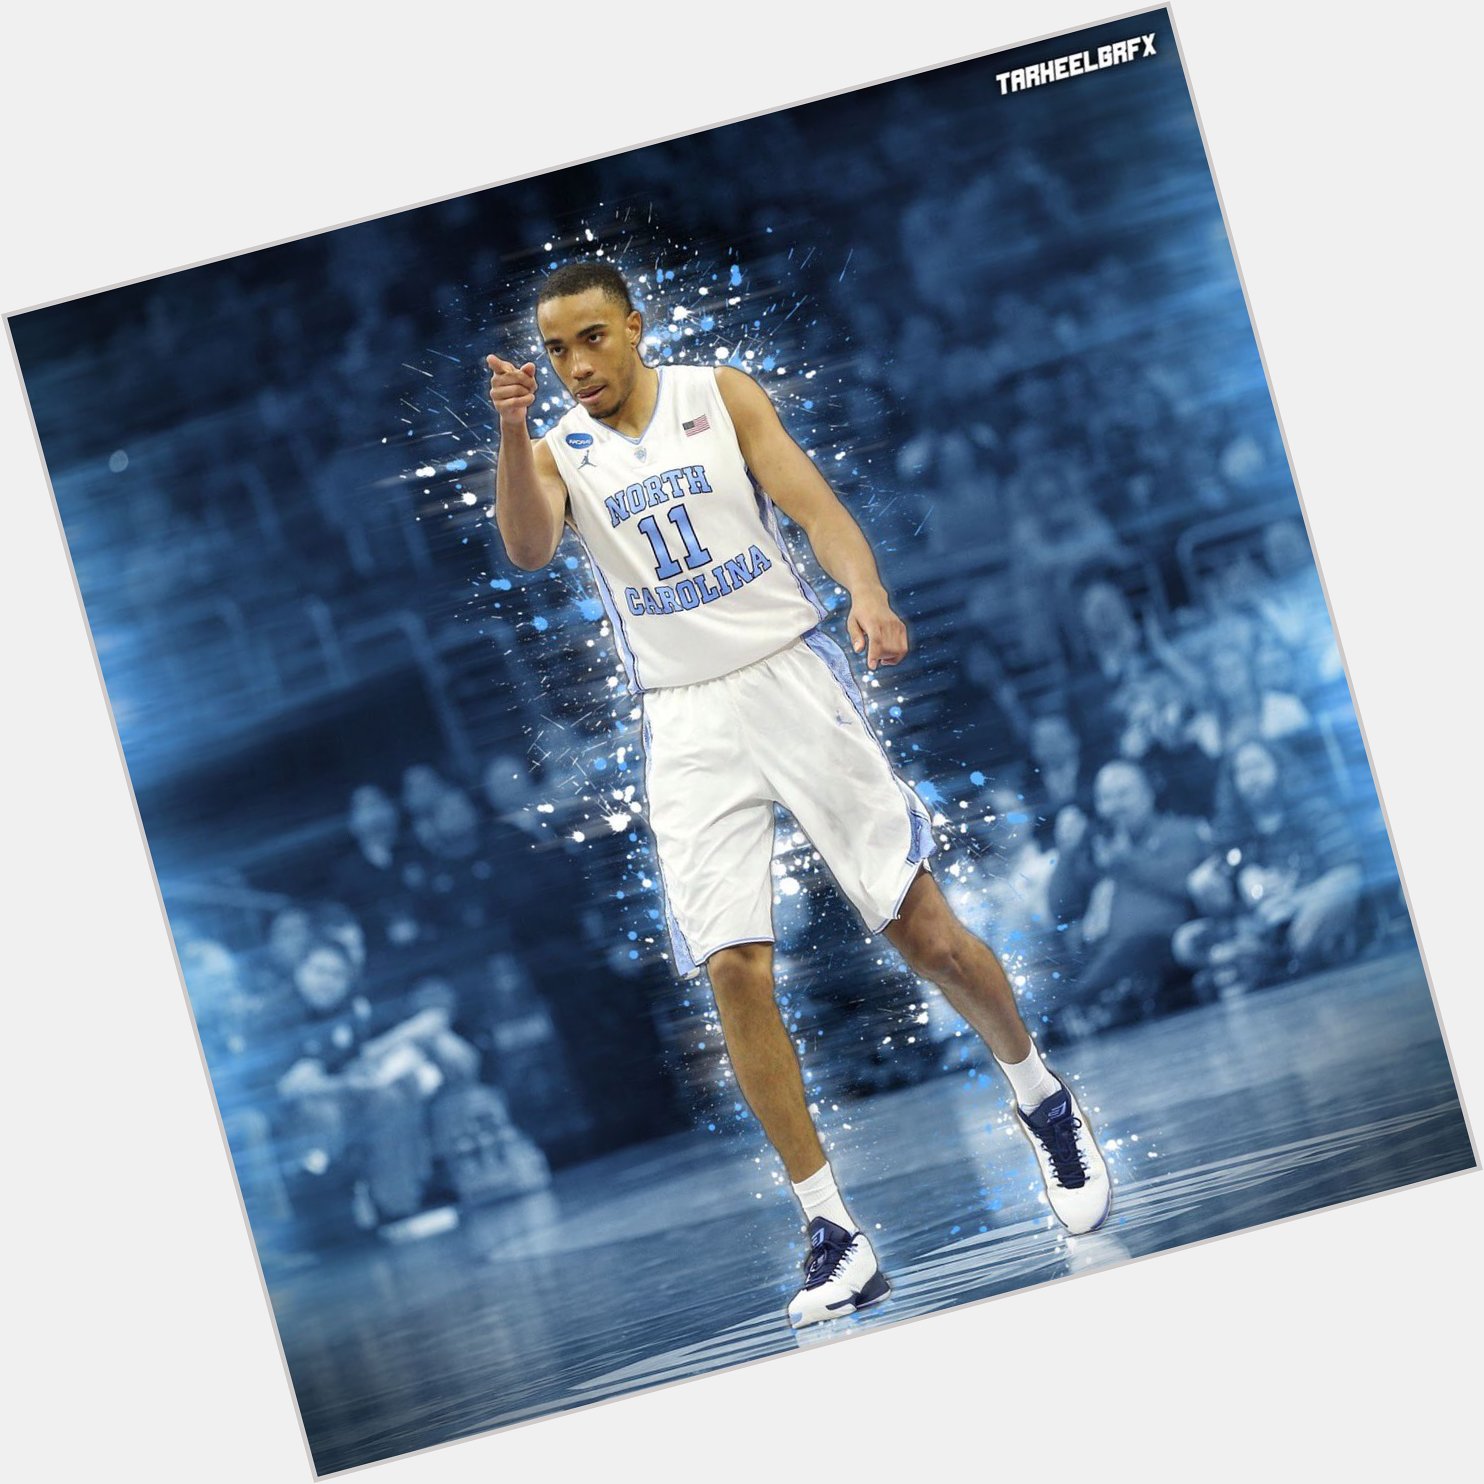  Happy Birthday to Brice Johnson!

(thanks for the comment on Instagram!) 